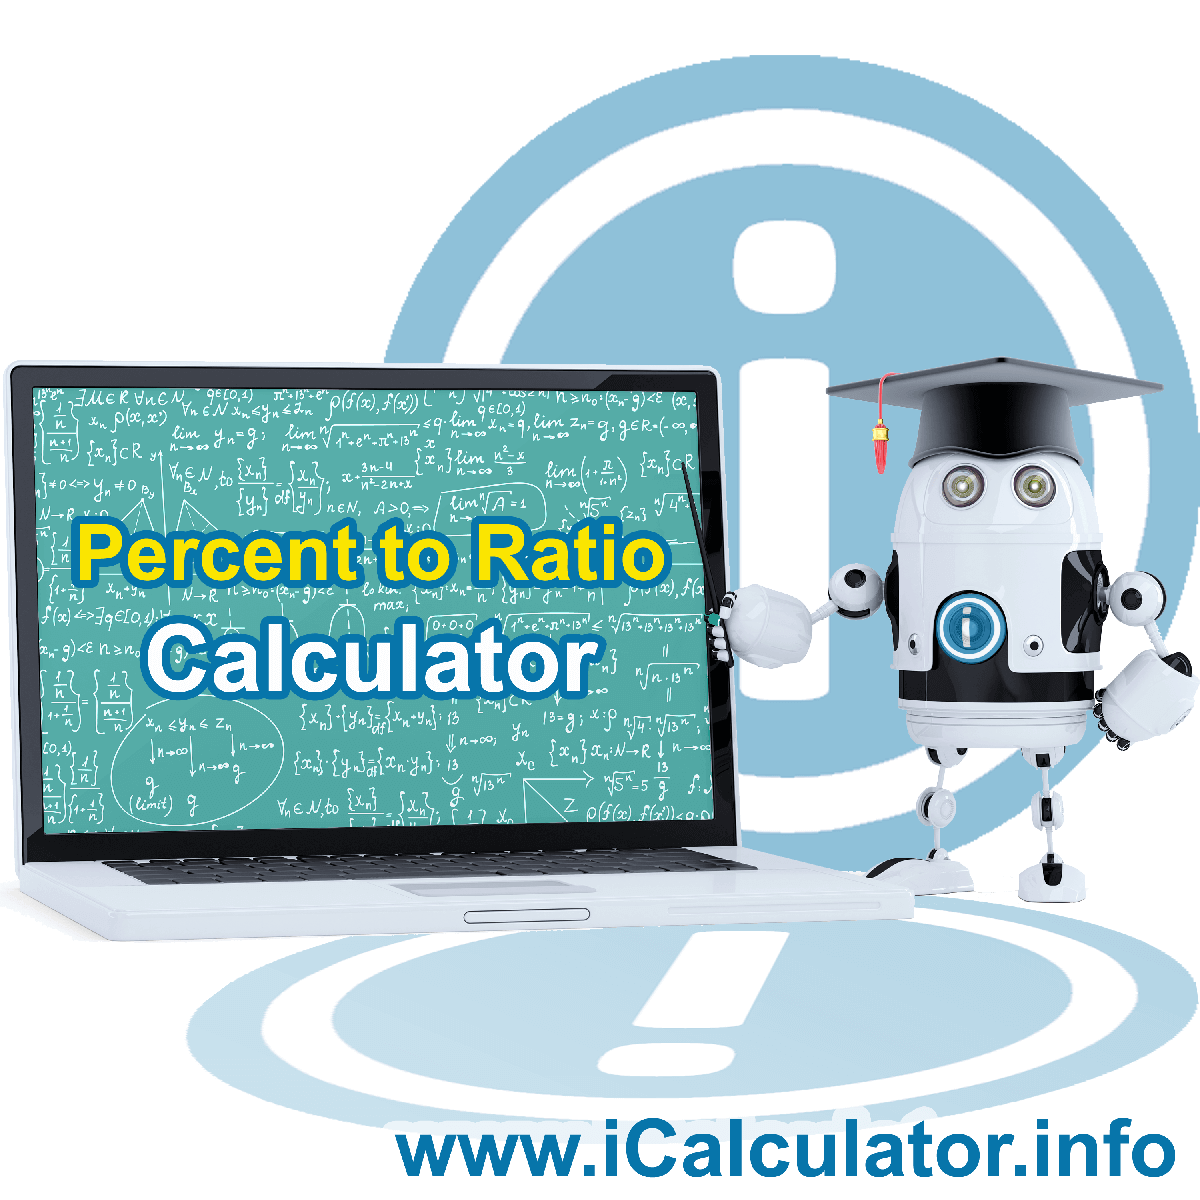 Percentage To Ratio. This image shows the properties and percentage to ratio formula for the Percentage To Ratio